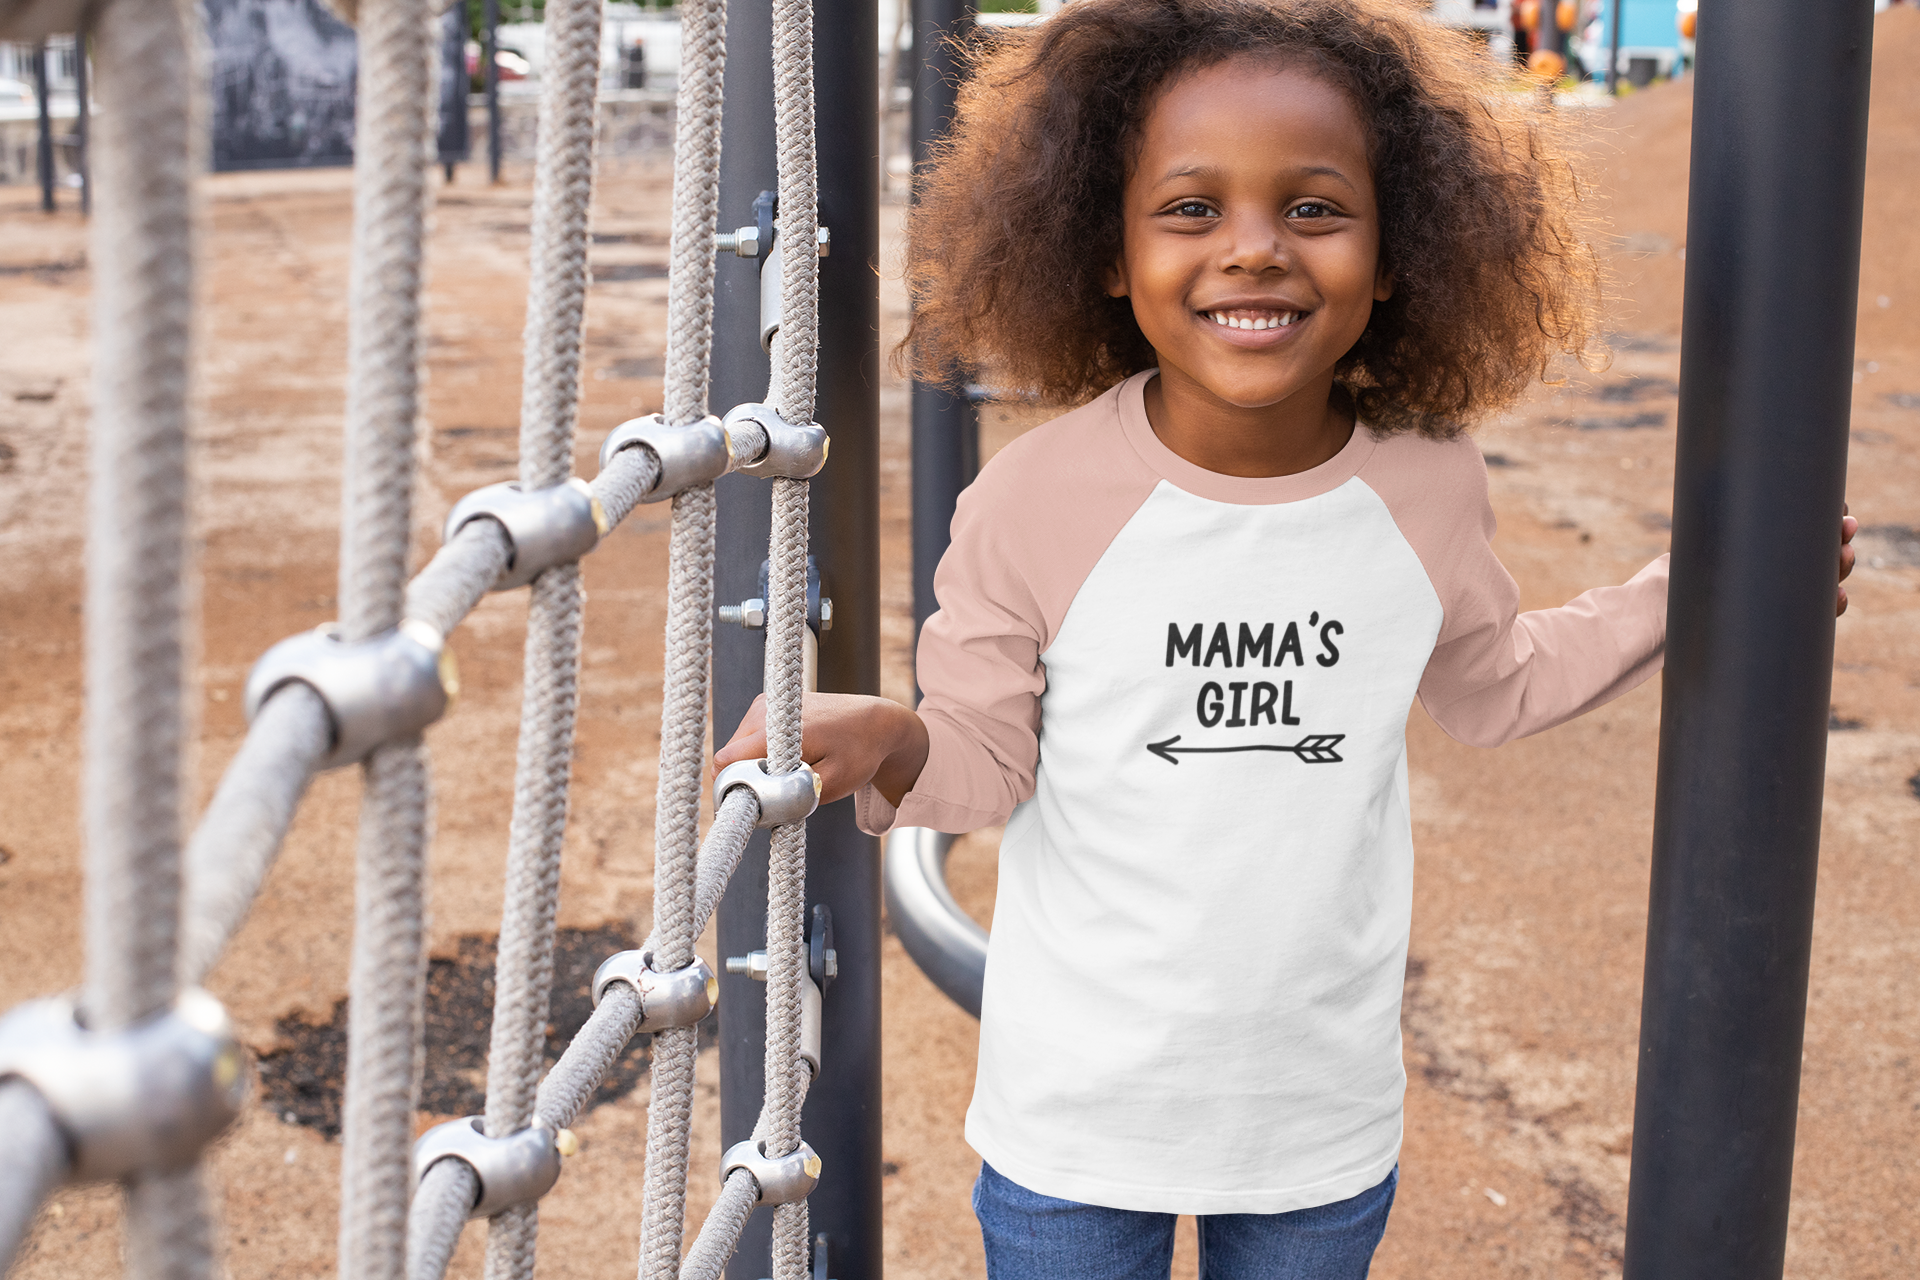 Mama's Girl - Three Quarter Sleeve T-Shirt. Sleeves are heather peach and base is white with the Mama's Girl writing in black with a cute arrow pointing to the left underneath. This is an image of a young girl wearing the shirt in a playground.